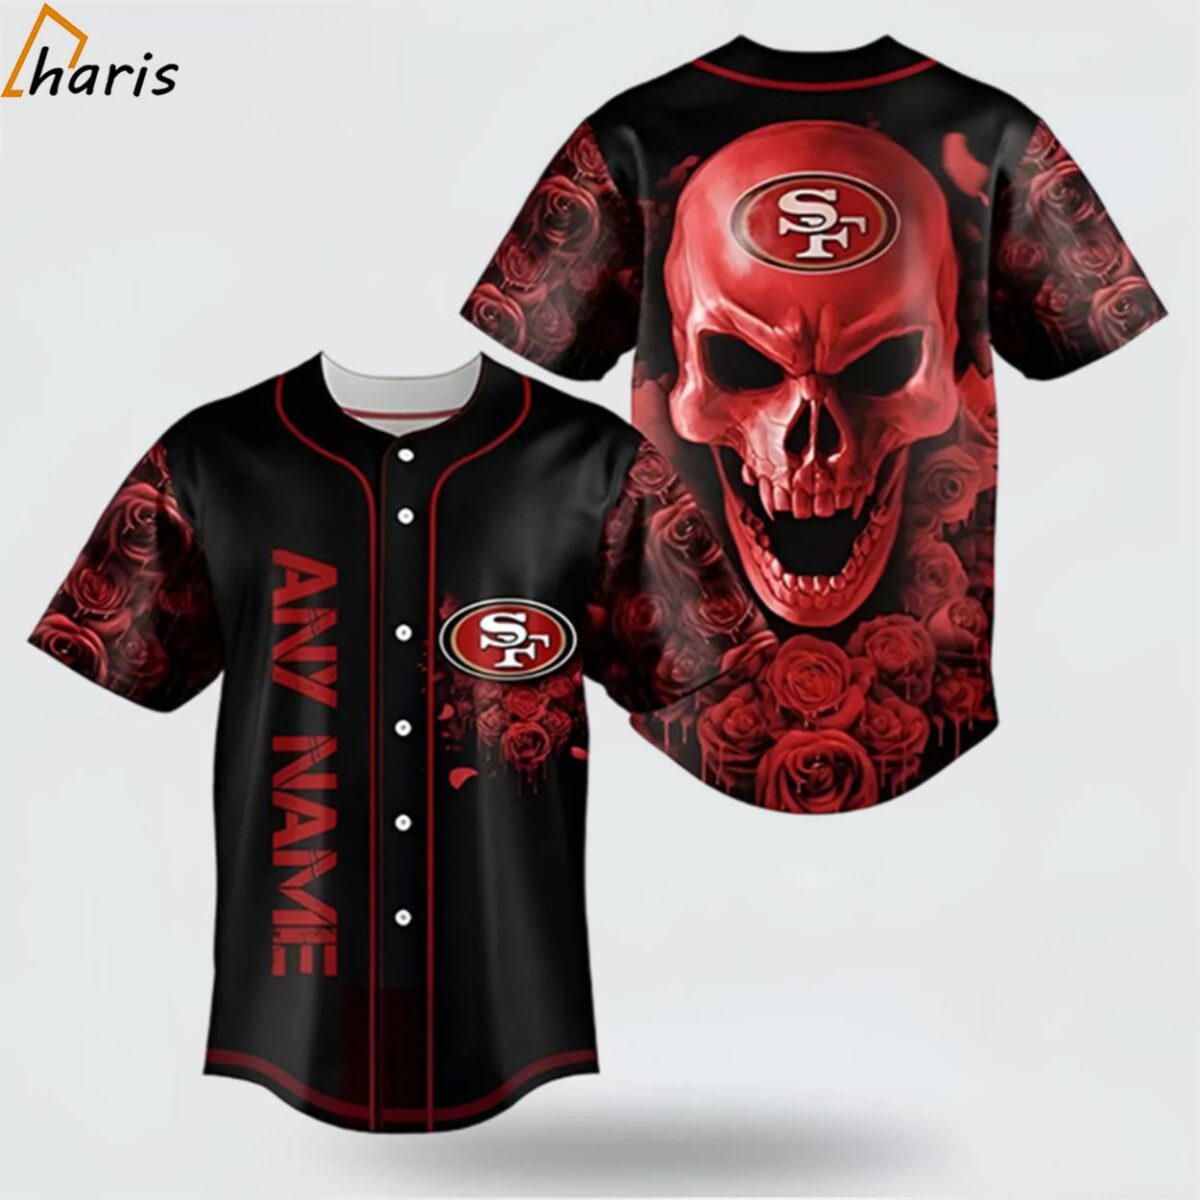 NFL San Francisco 49ers 3D Personalized Skull Represent Your Team Baseball Jersey 1 jersey